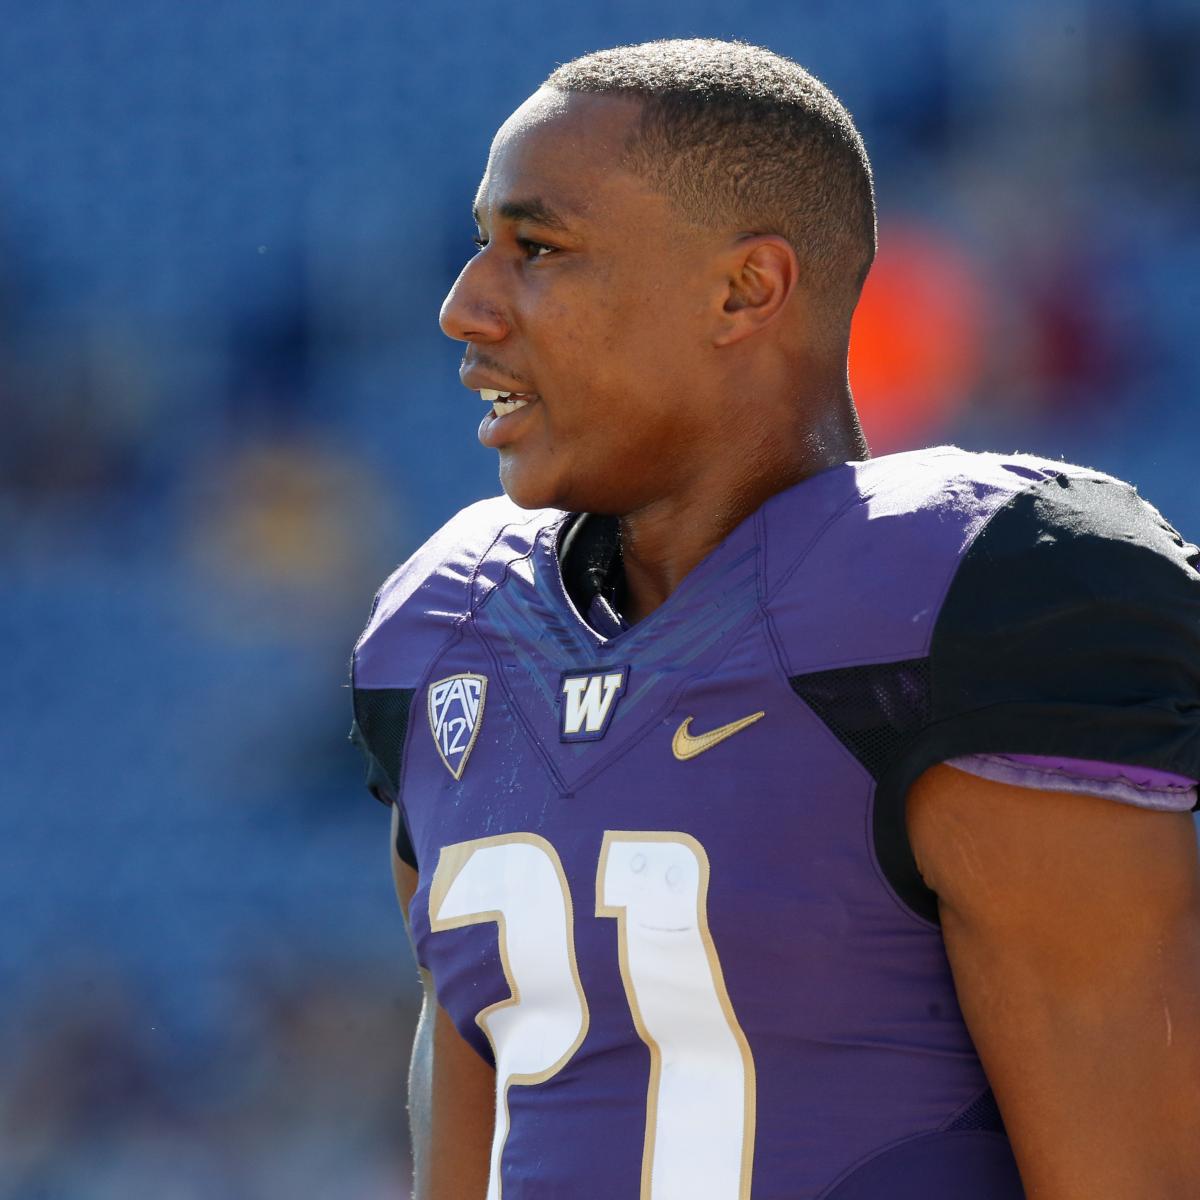 Marcus Peters admits he deserved to be kicked off team at Washington - NBC  Sports